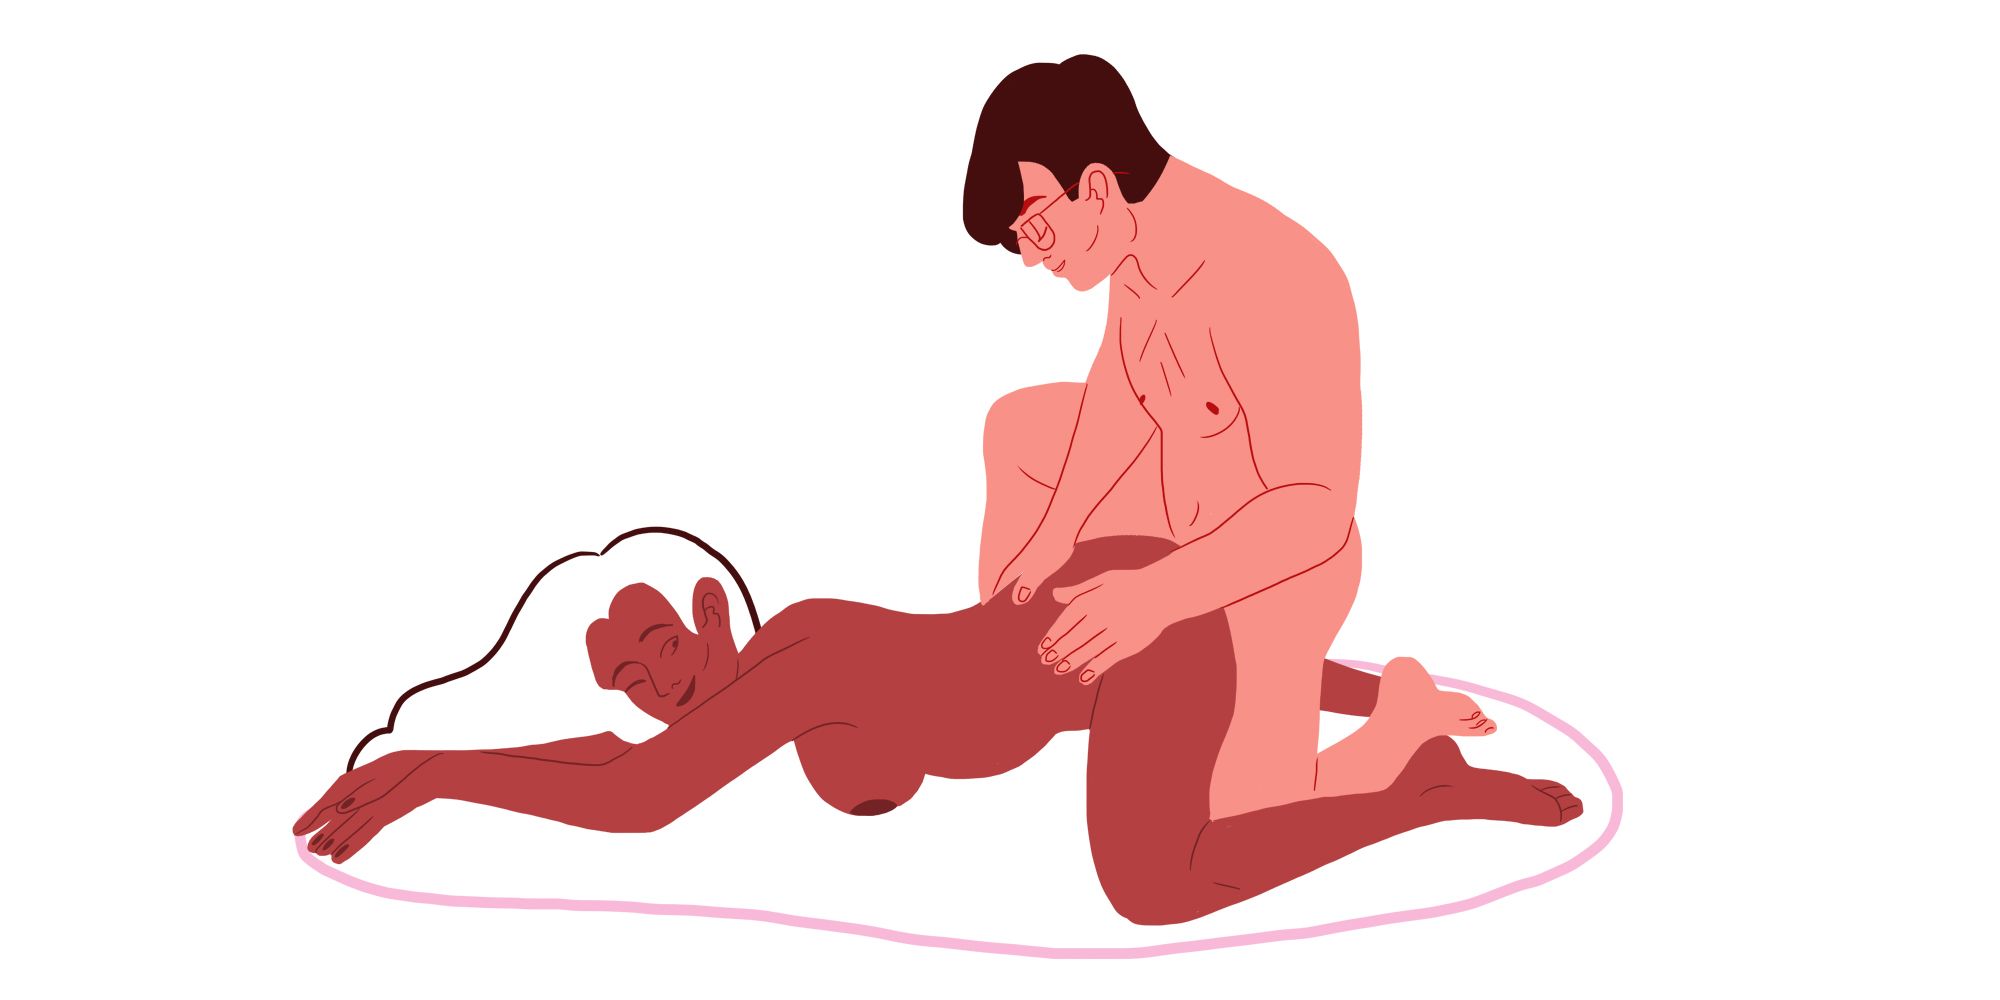 Kinky Anal Positions - 24 Best Anal Sex Positions to Try for All Experience Levels